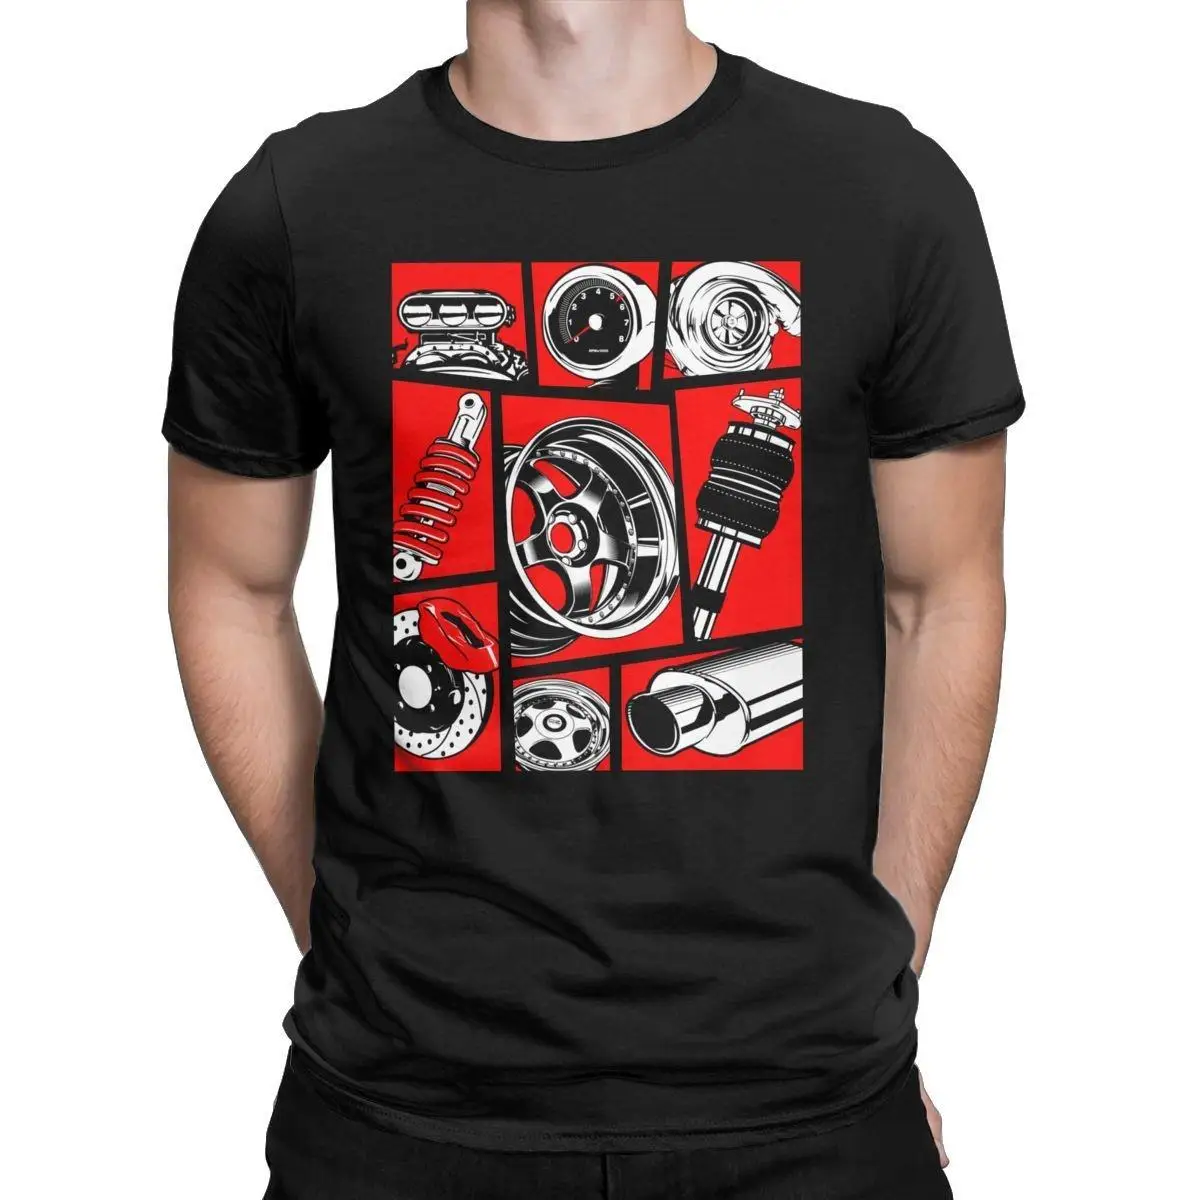 Men's Car Culture T Shirt Pure Cotton Clothes Creative Short Sleeve Round Neck Tees Graphic Printed T-Shirts